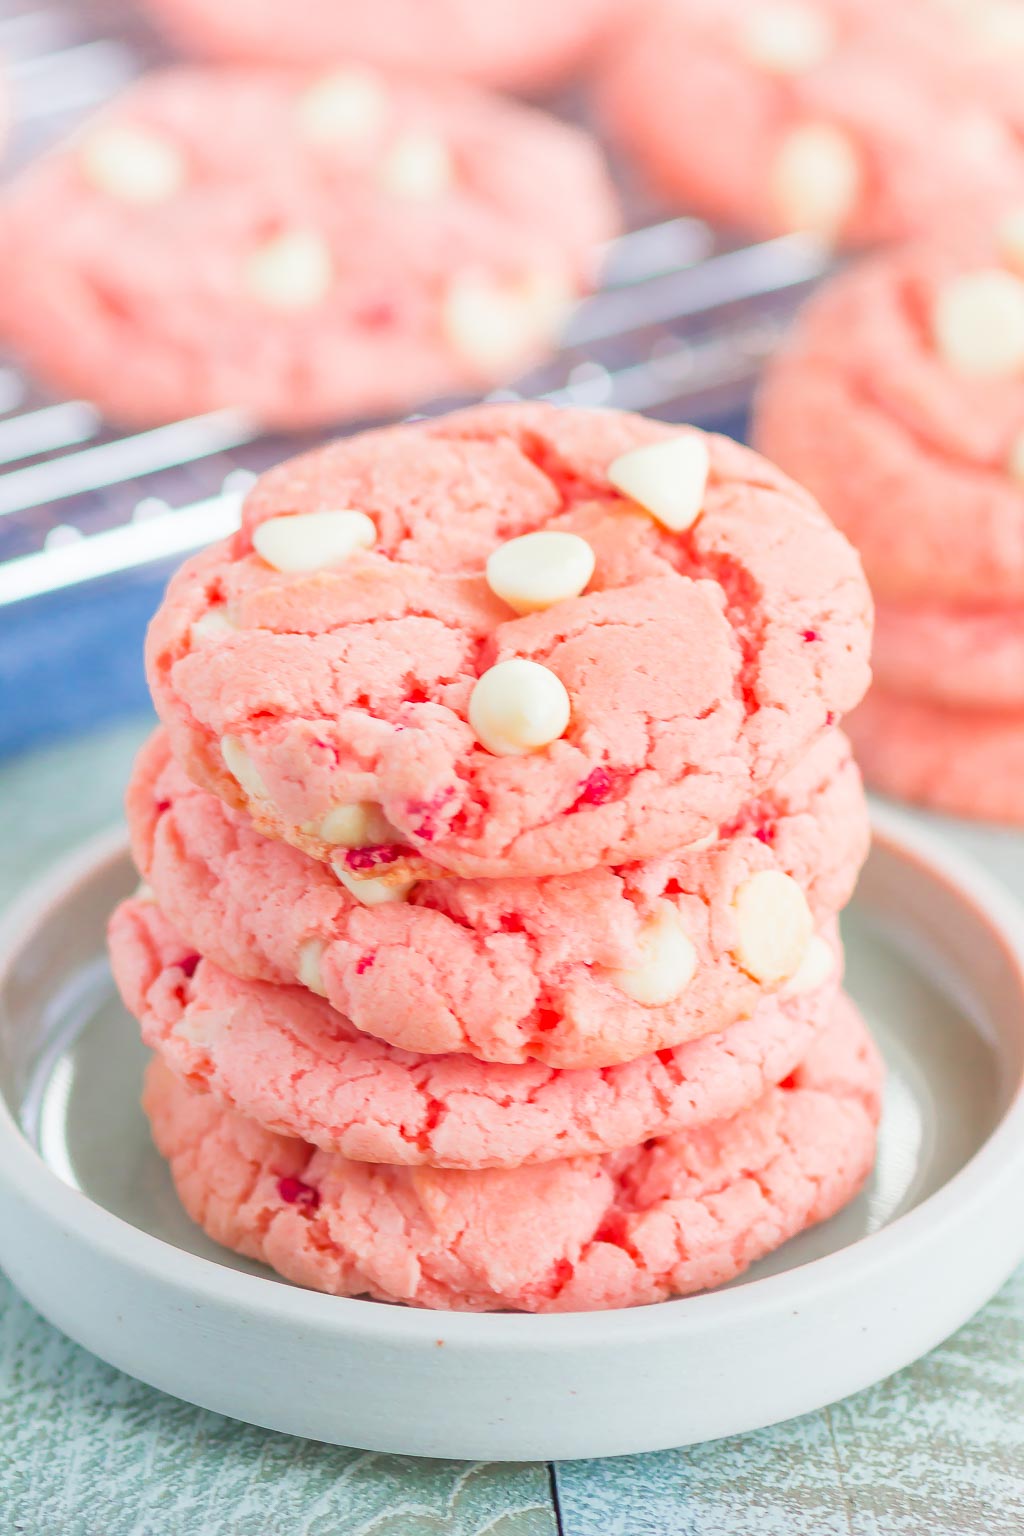 Strawberry Cake Mix Cookies (3 ingredients!) | The Recipe Critic